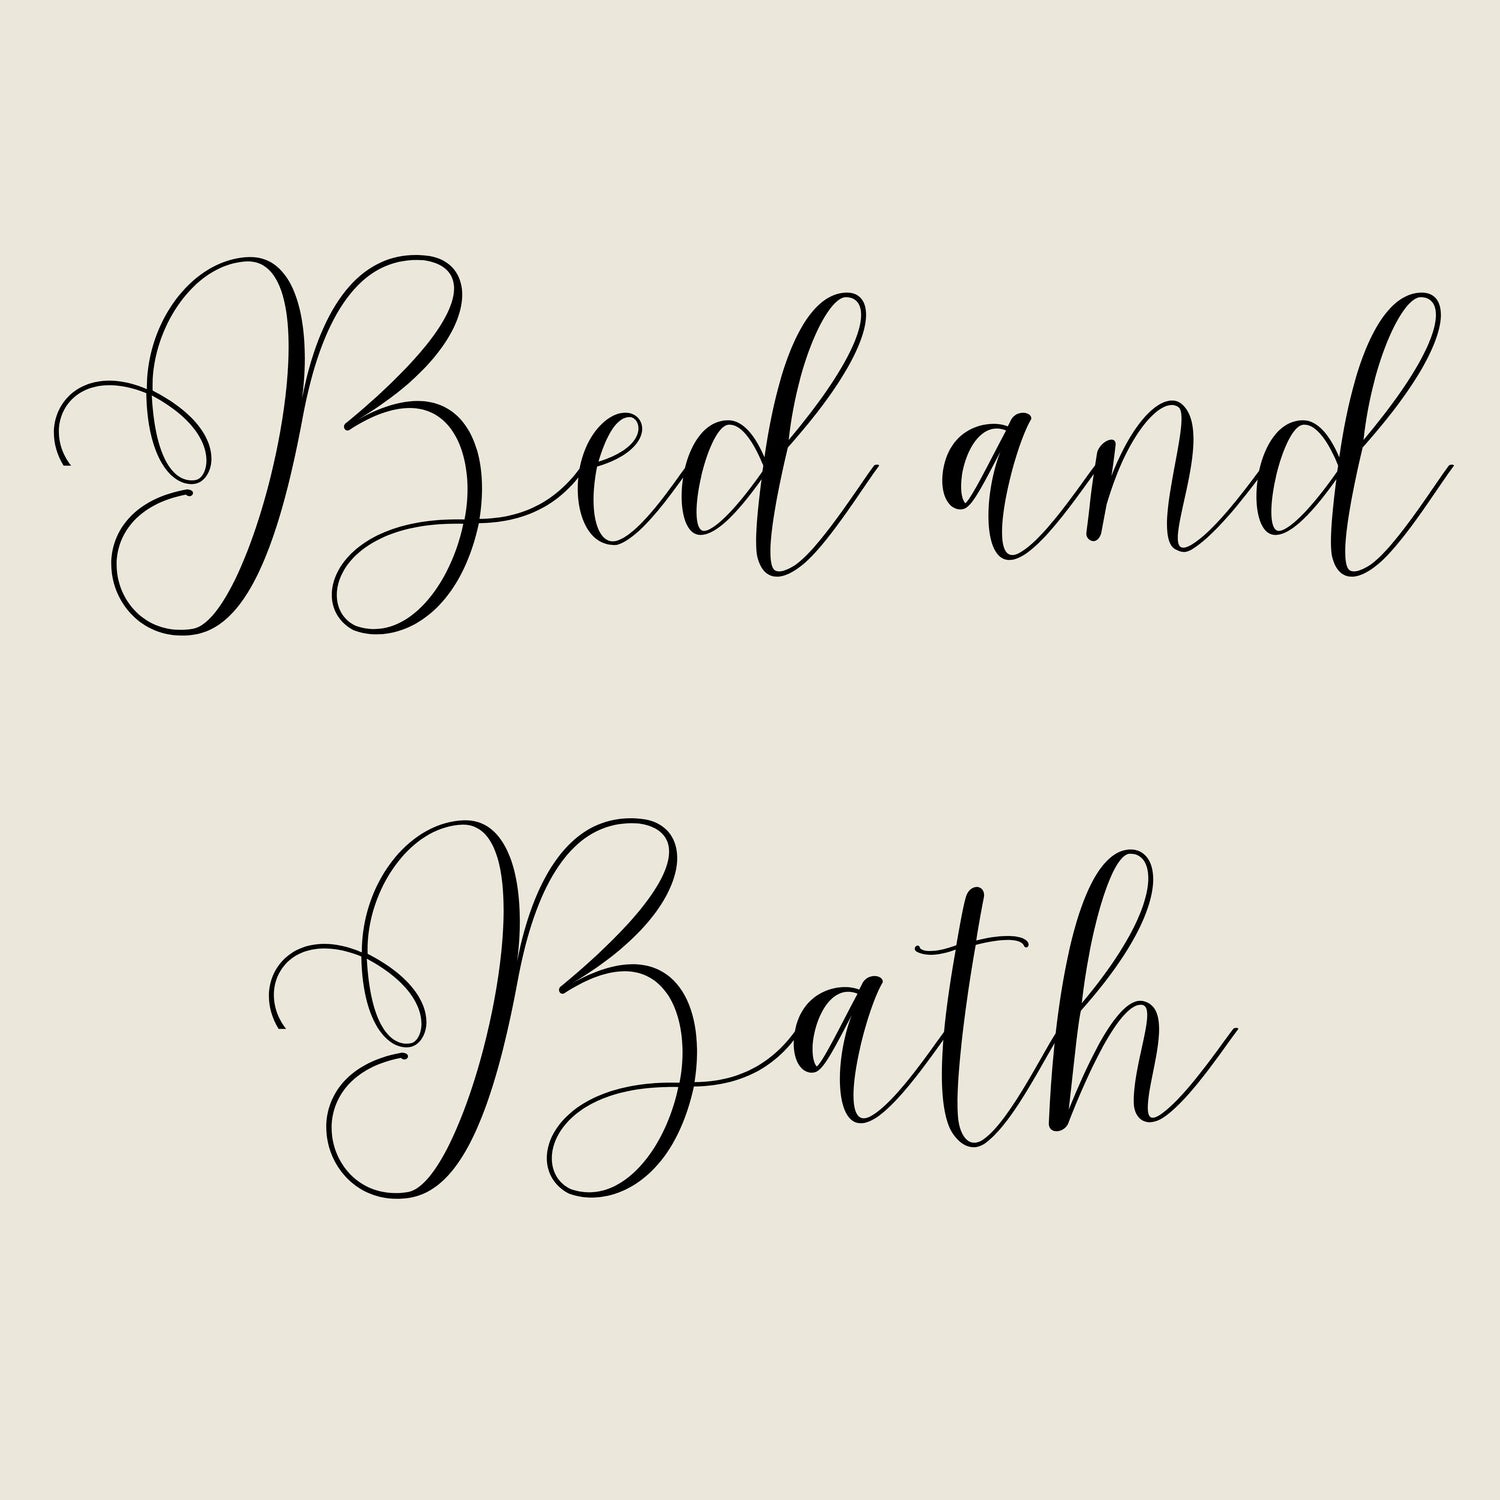 Bed and Bath